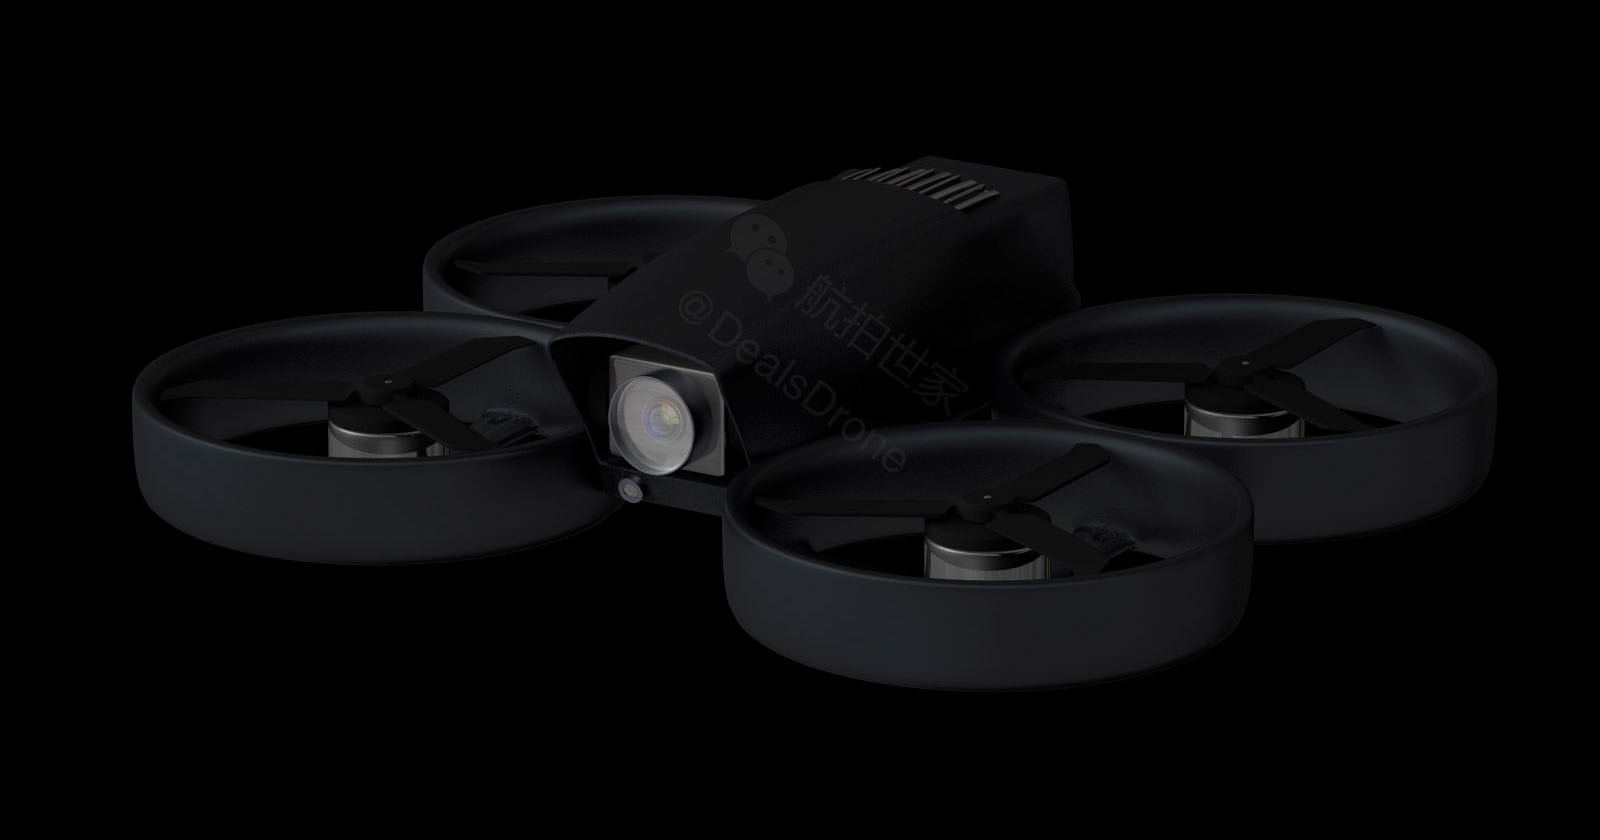  leaked allege dji working compact racing-style drone 